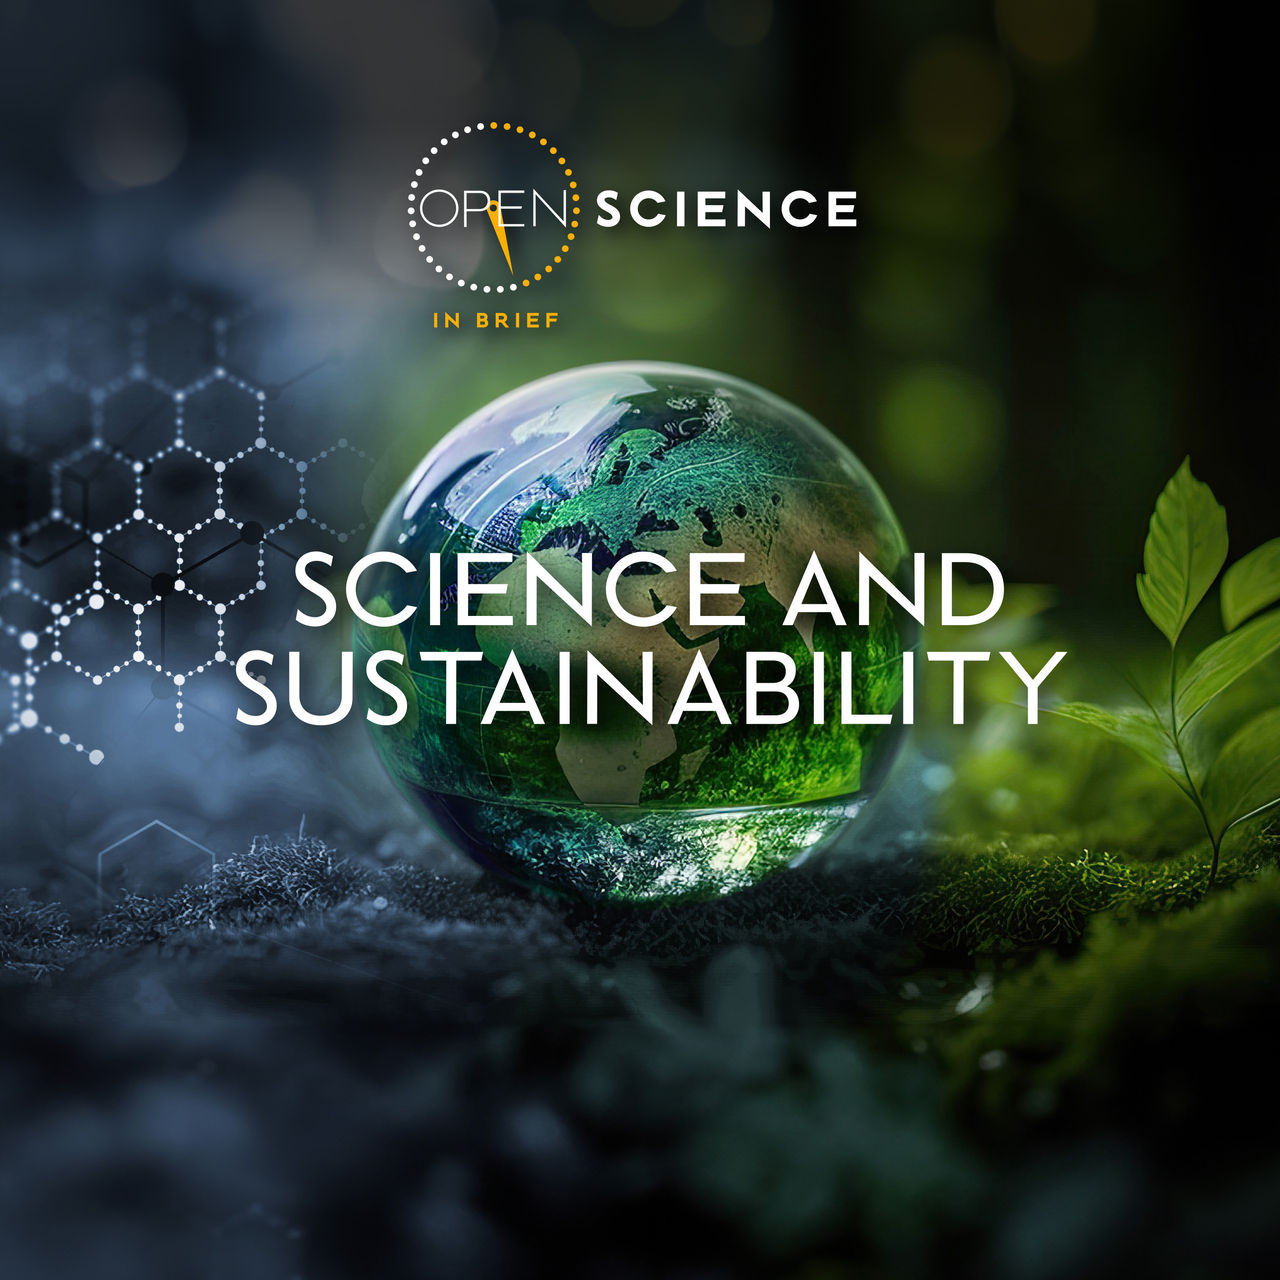 Open Science event: Science and sustainability